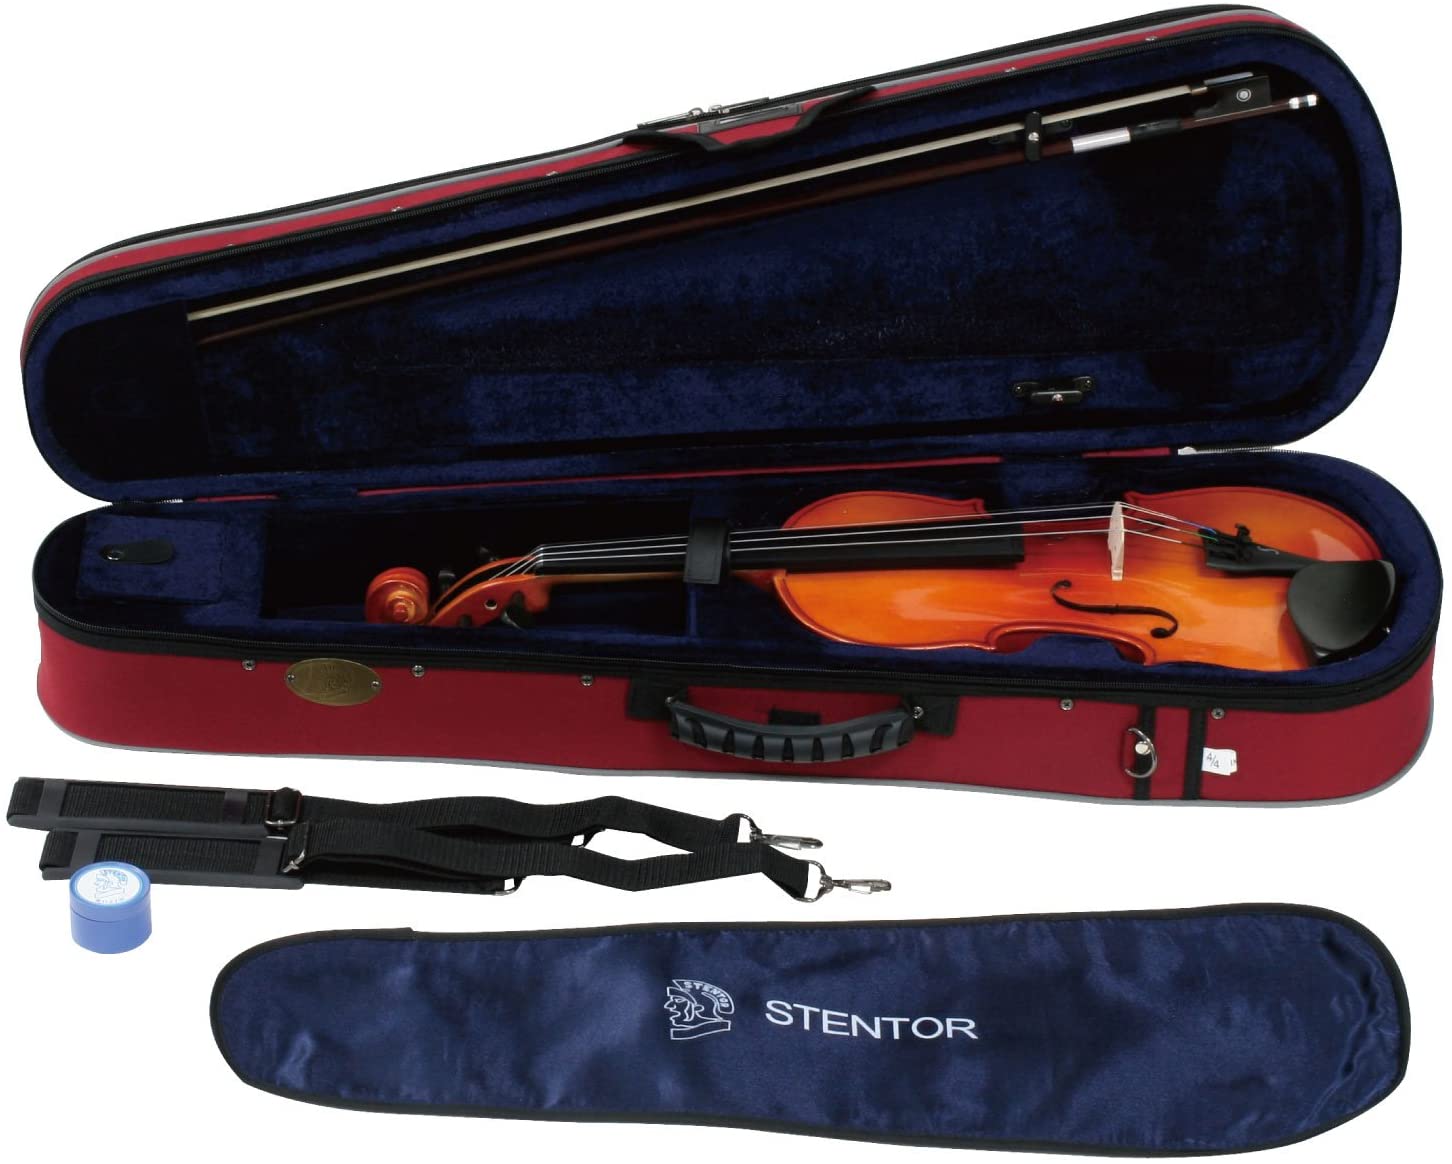 You are currently viewing Stentor 1500- The Best Violin for Beginners